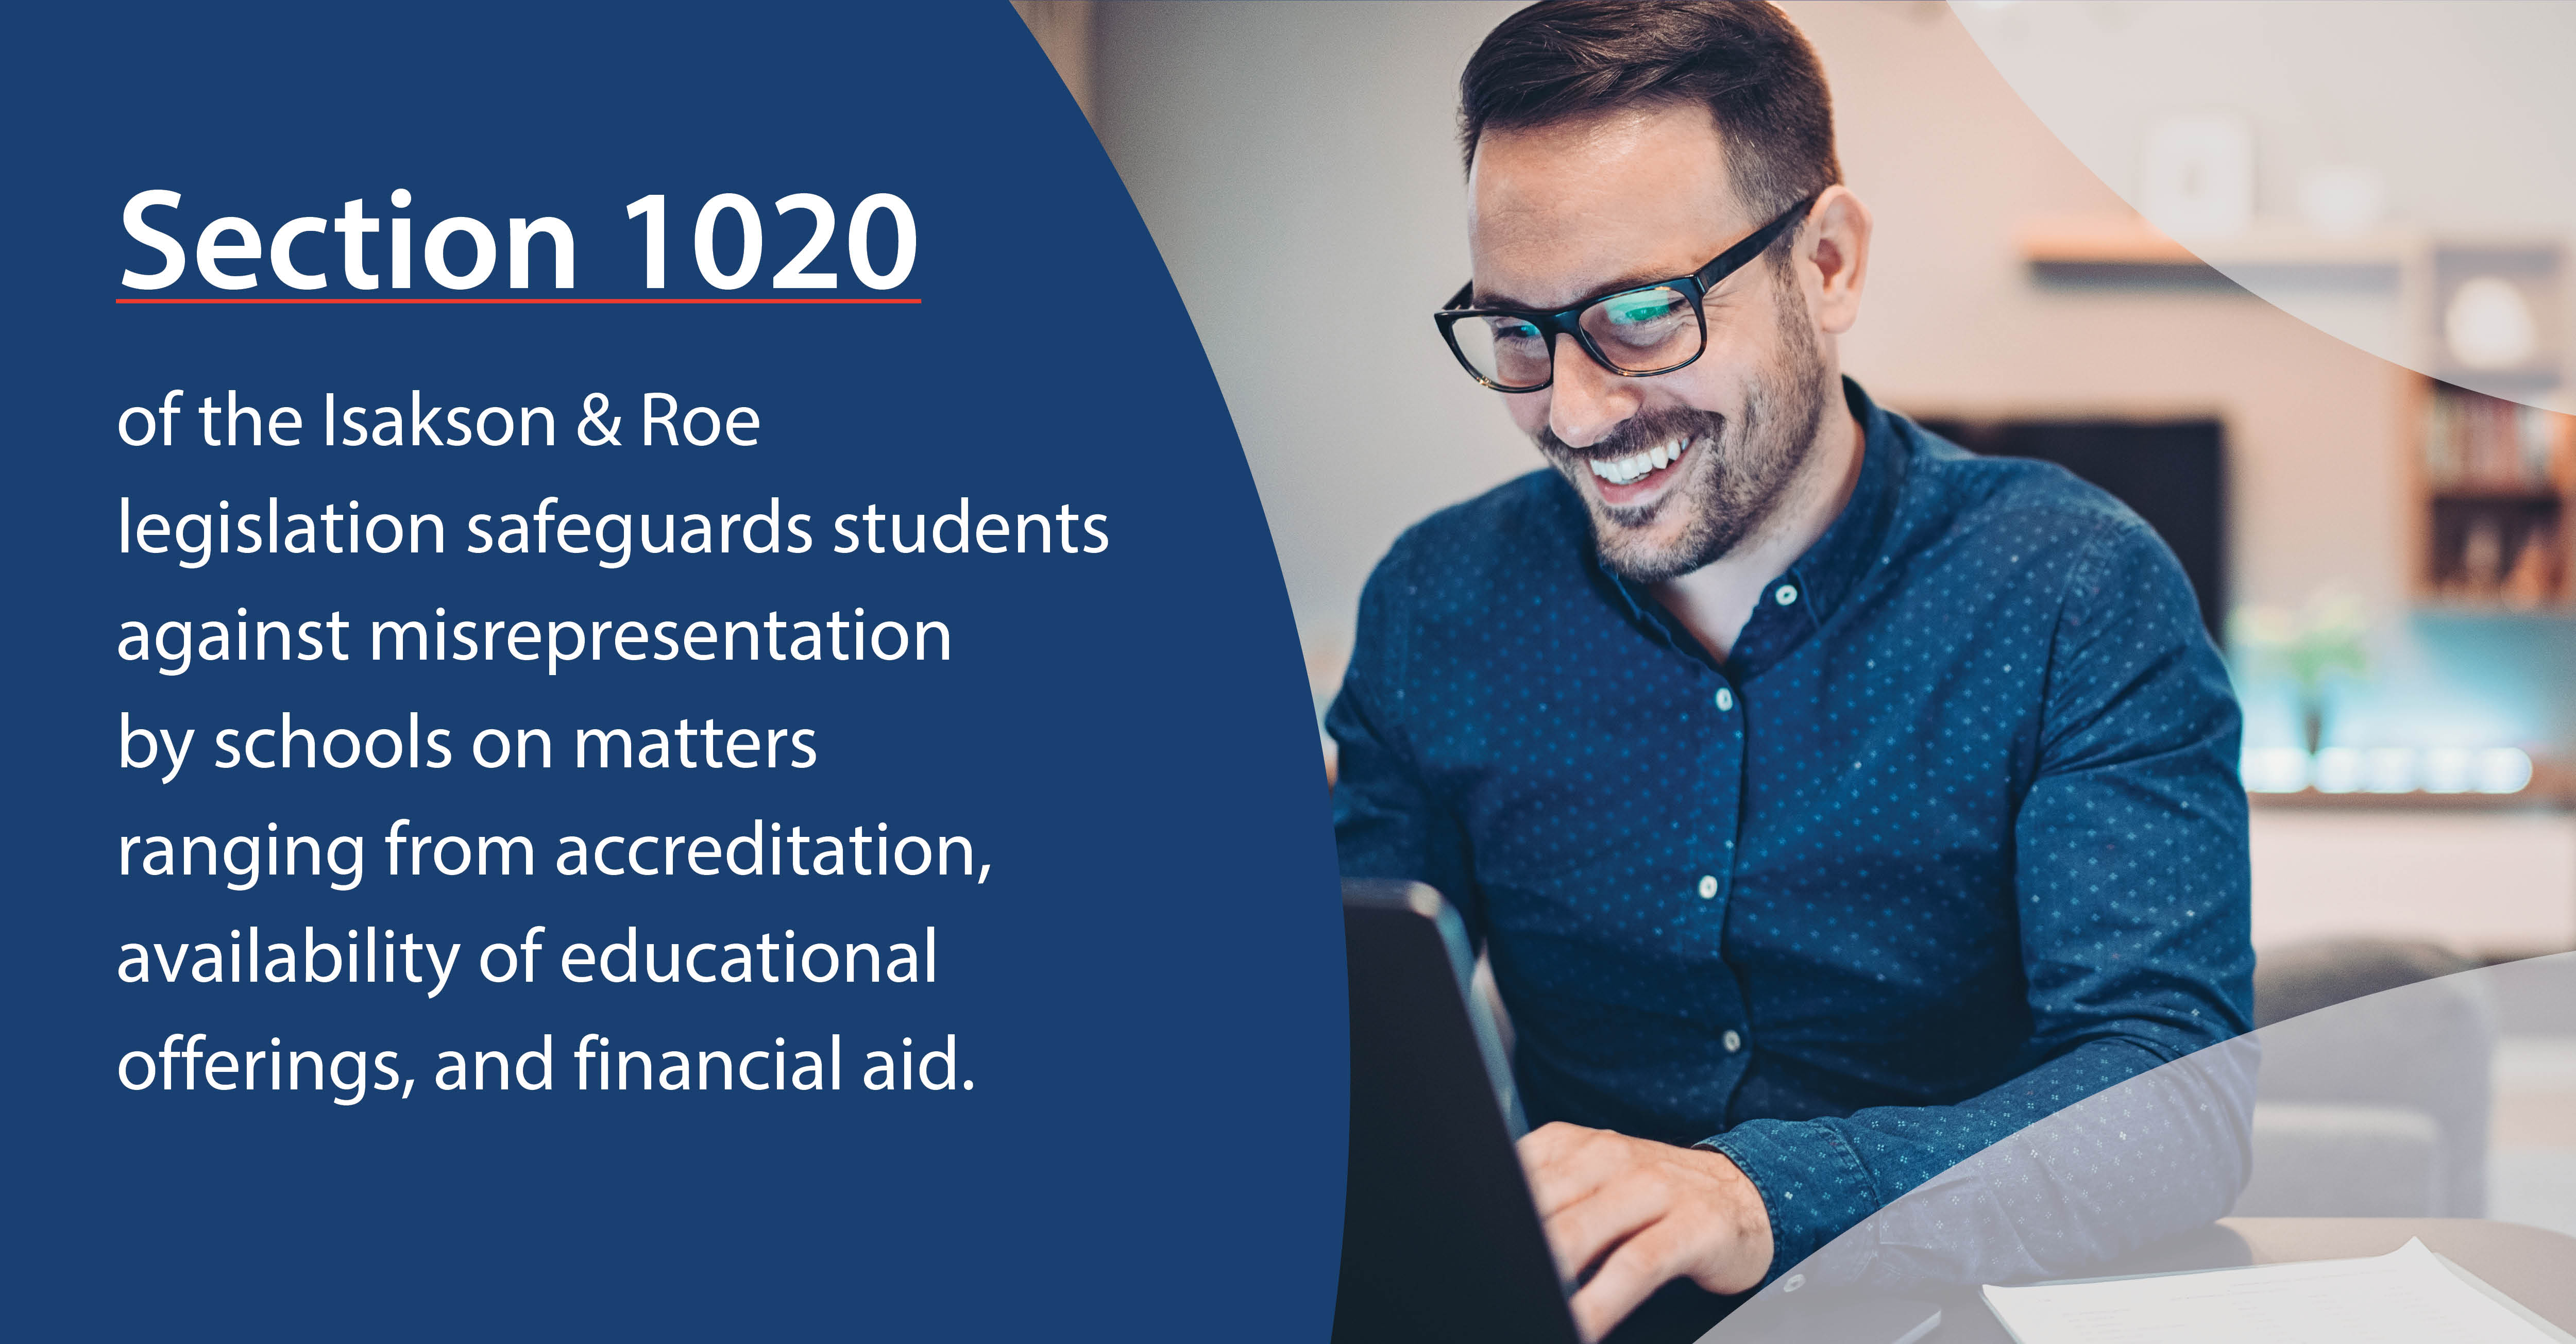 Image:  Man using a laptop.  Content:  Section 1020 of the Isakson & Roe legislation safeguards students against misrepresentation by schools on matters ranging from accreditation, availability of educational offerings, and financial aid.